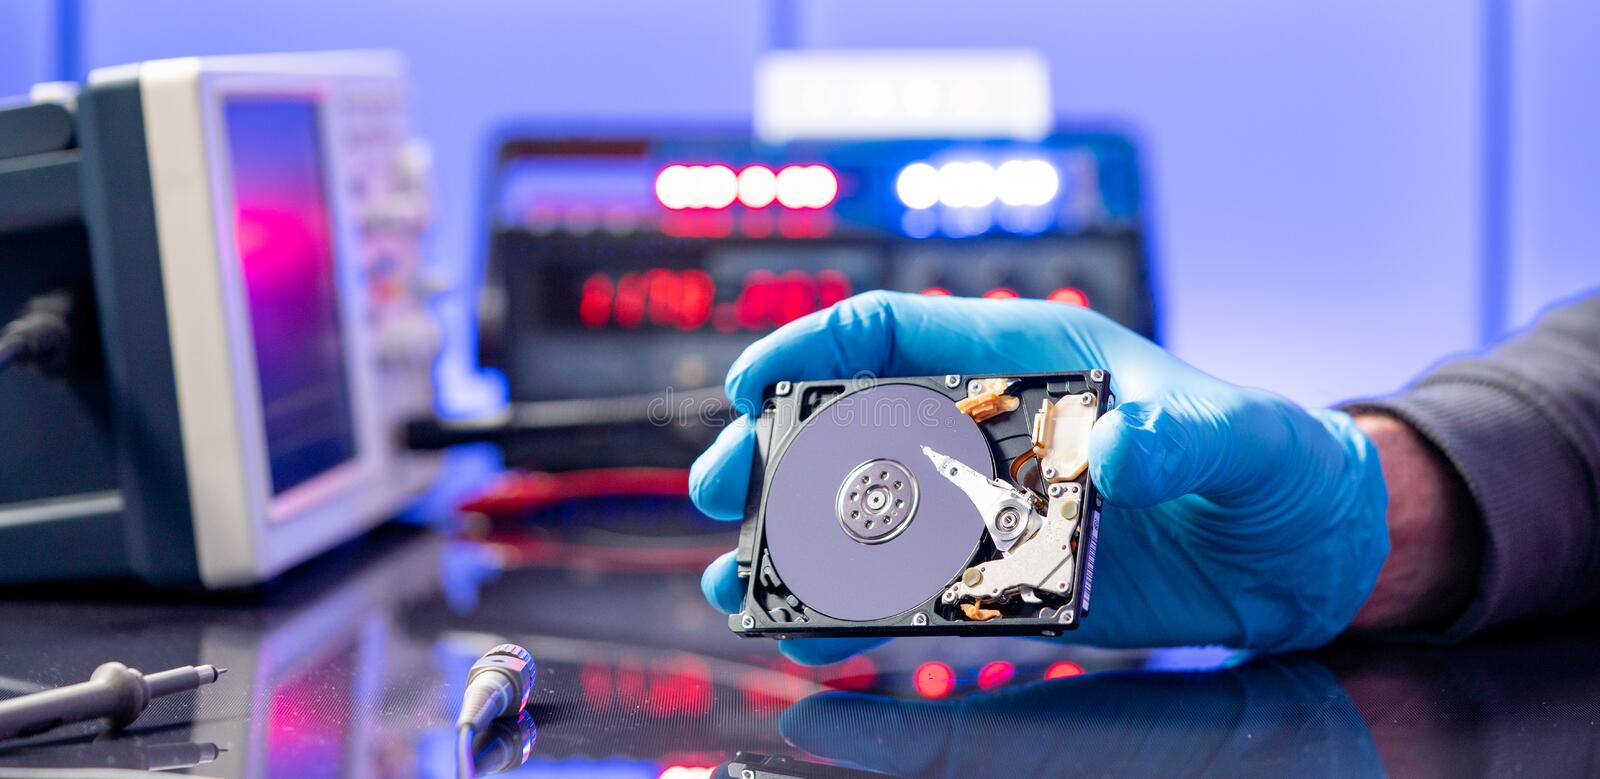 Tampa Data Recovery Service From Damaged Hard Drives